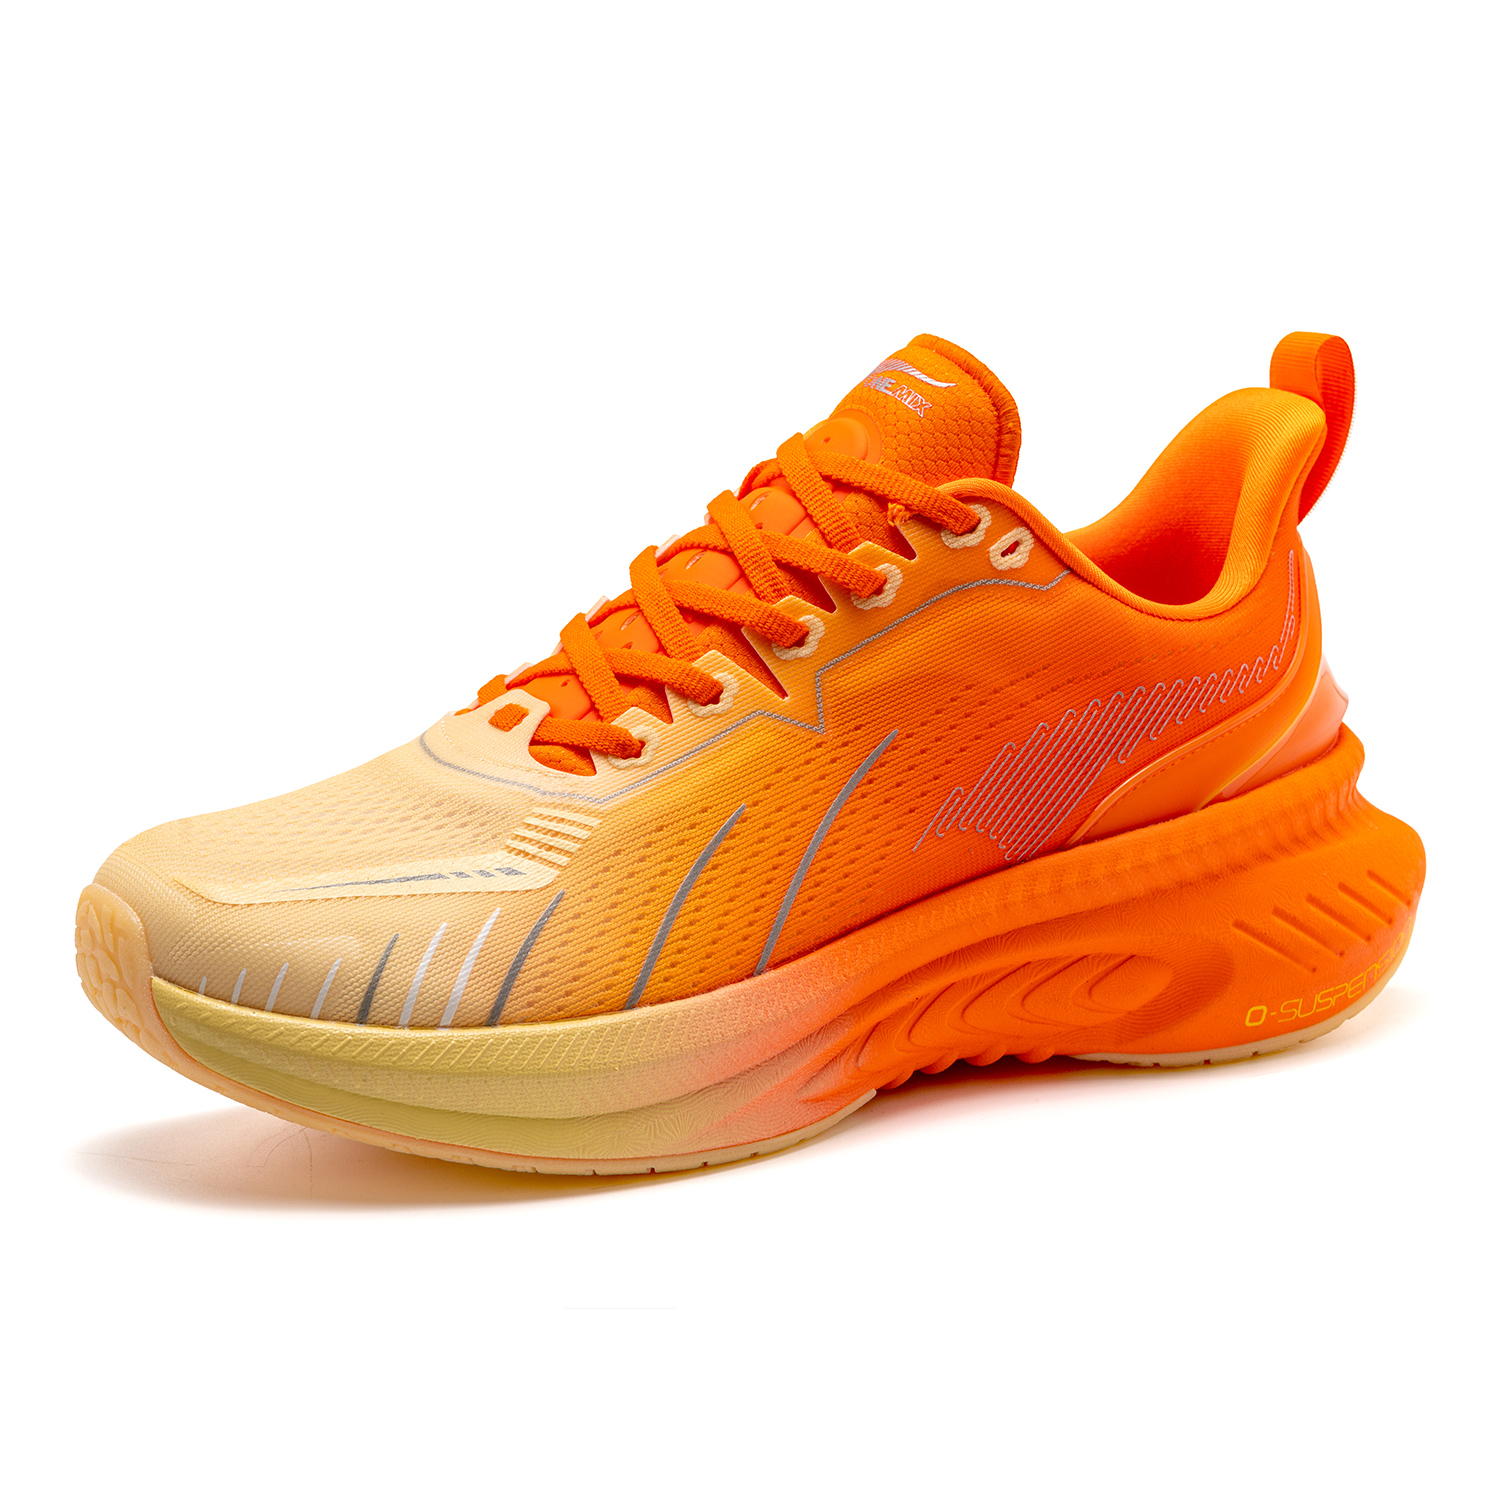 hybrid intellectual Hound Orange Running Shoes Sport ONEMIX Breathable Sneakers for Men